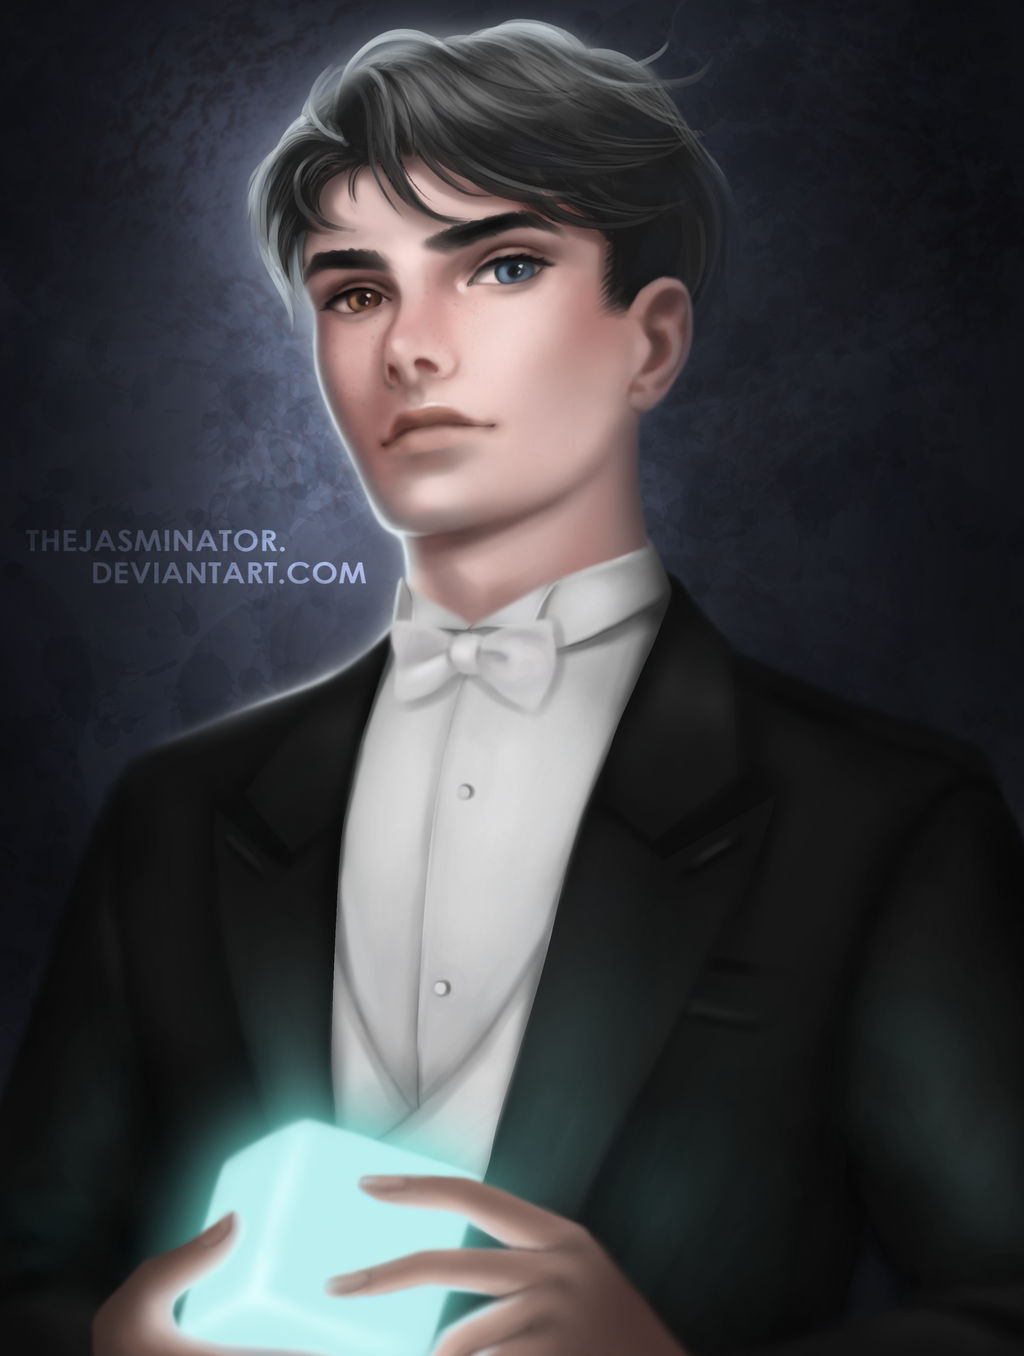 Artemis Fowl and Holly Short by Kogtrinarion on DeviantArt